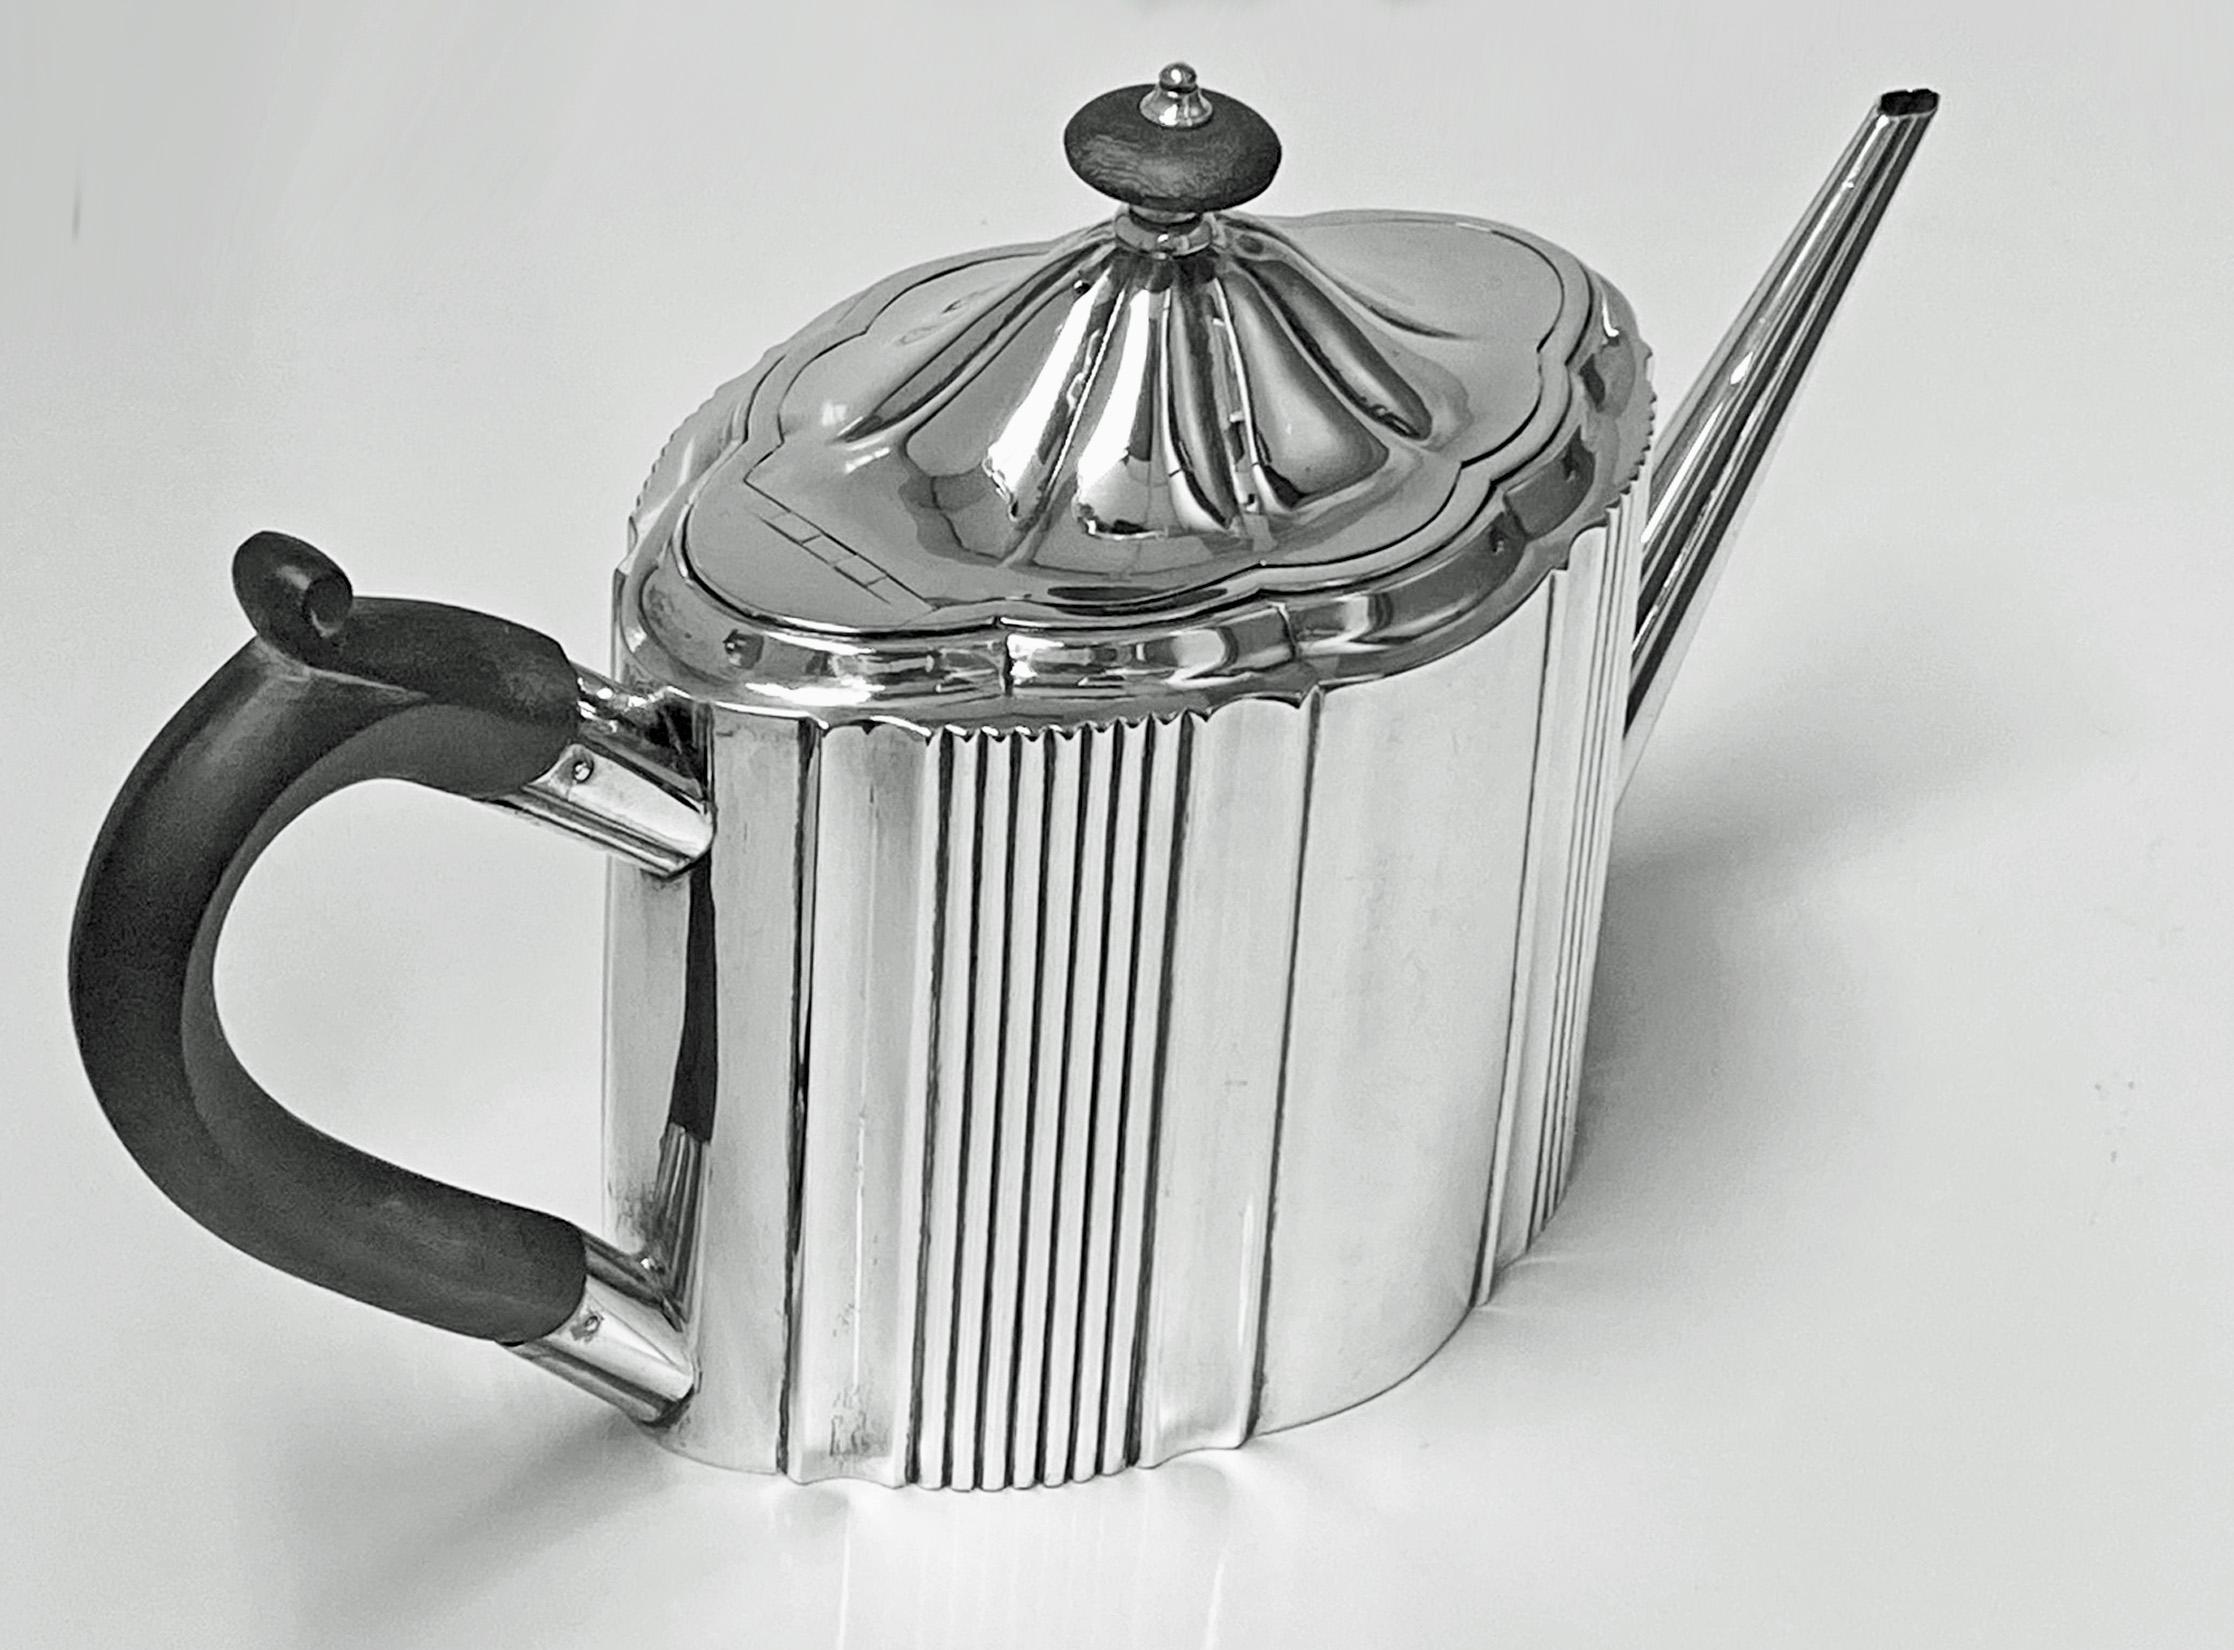 A fine and elegant Georgian sterling silver teapot, London 1794, with maker's mark for Robert Hennell I. The teapot of oval ribbed panel form with domed lid, ebony wood handle and silver topped ebony finial, straight spout. Fully hallmarked to base